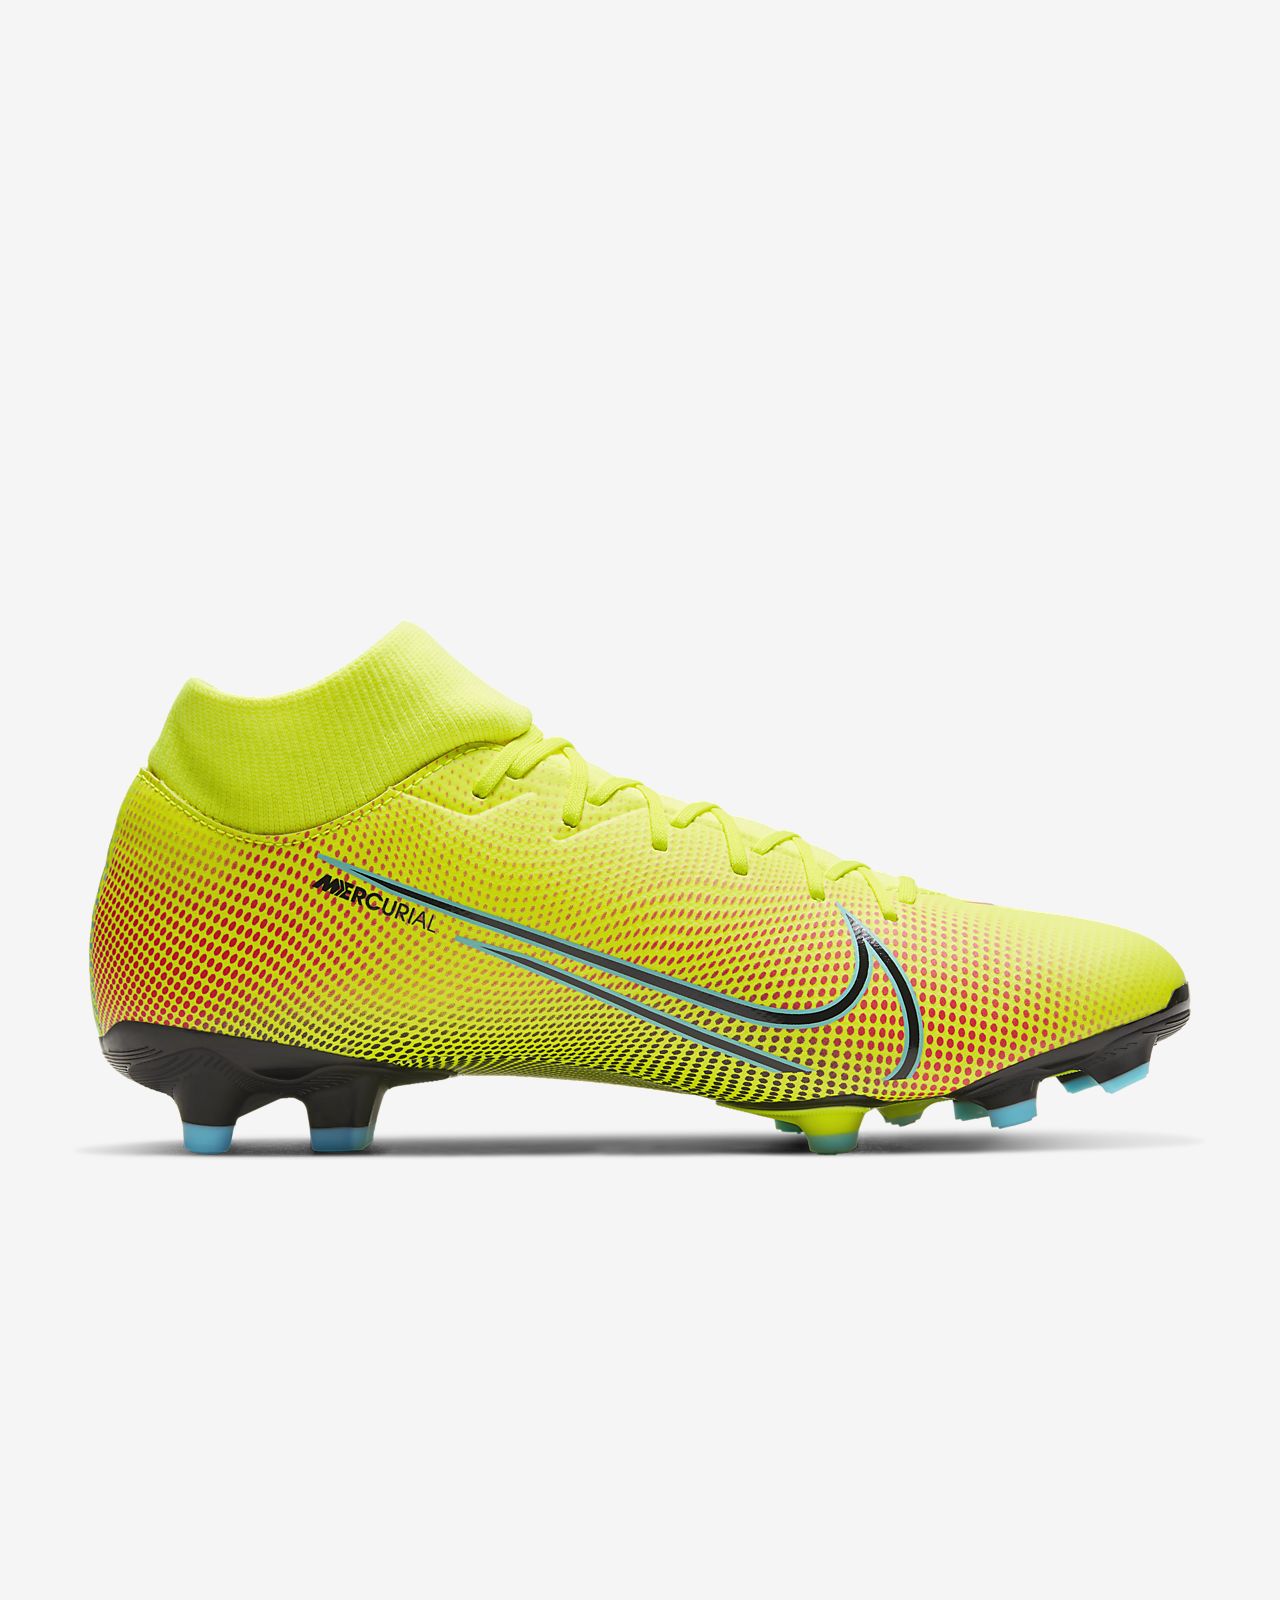 Nike Mercurial Superfly VI Academy CR7 soccer shoes.